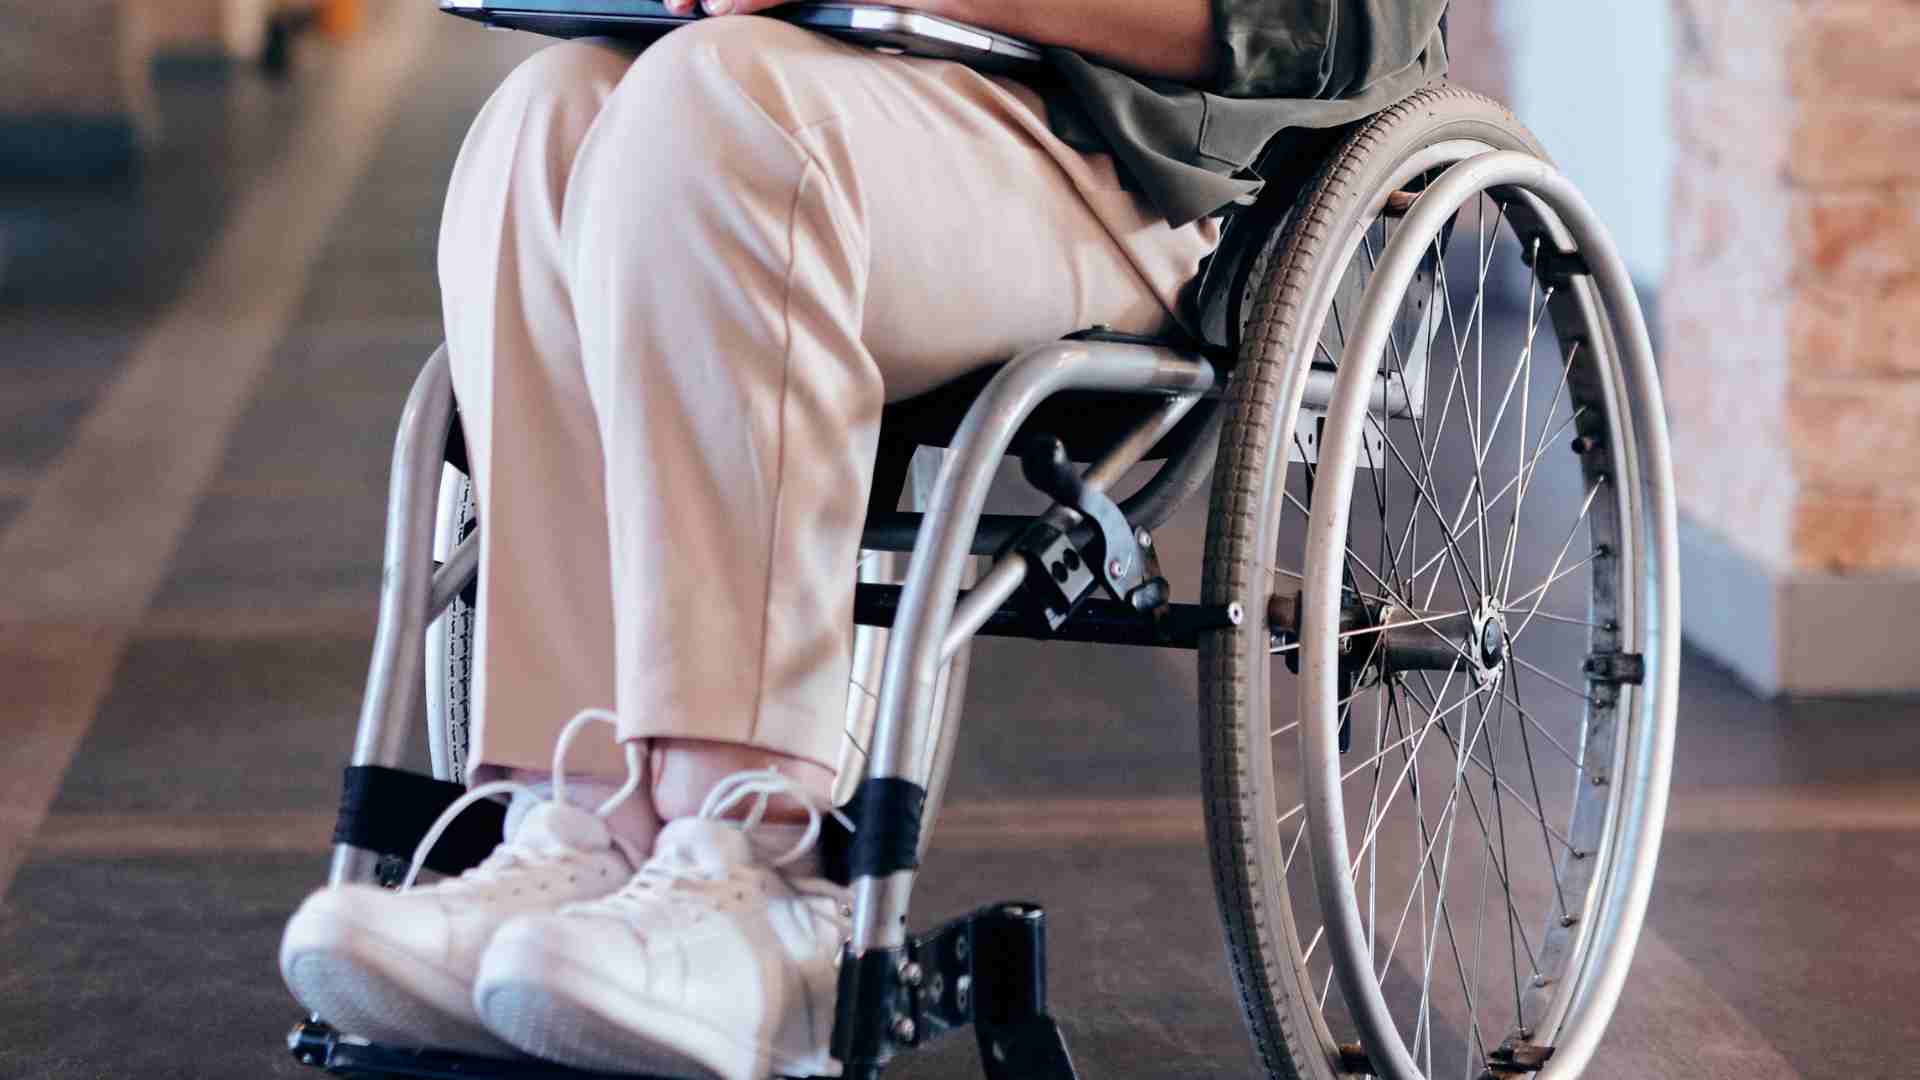 SSDI benefits are for people with a qualifying disability and who have met work requirements